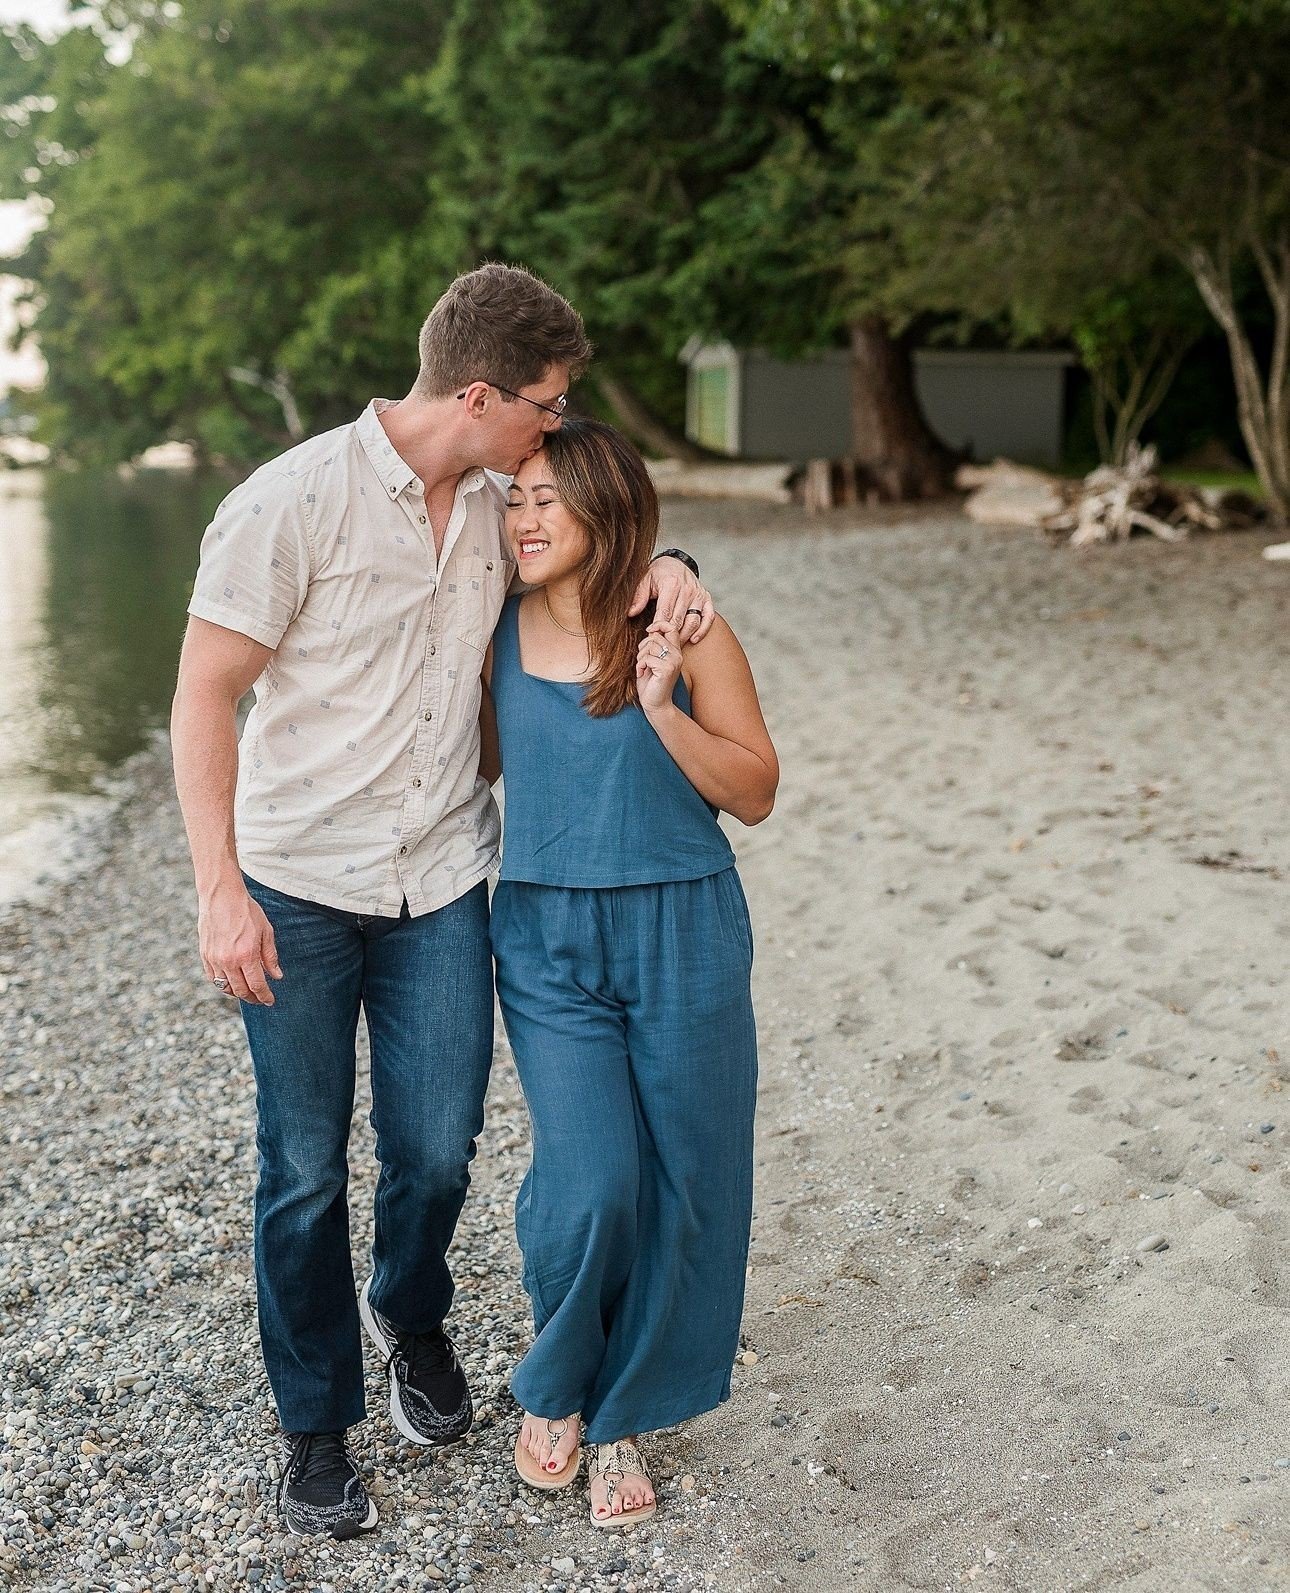 Teresa and her family flew in from Fort Worth, Texas, and Ohio for a special Pacific Northwest getaway. It was their first reunion in ages, and they were eager to capture the moments together. We gathered at a picturesque spot in Gig Harbor, with the